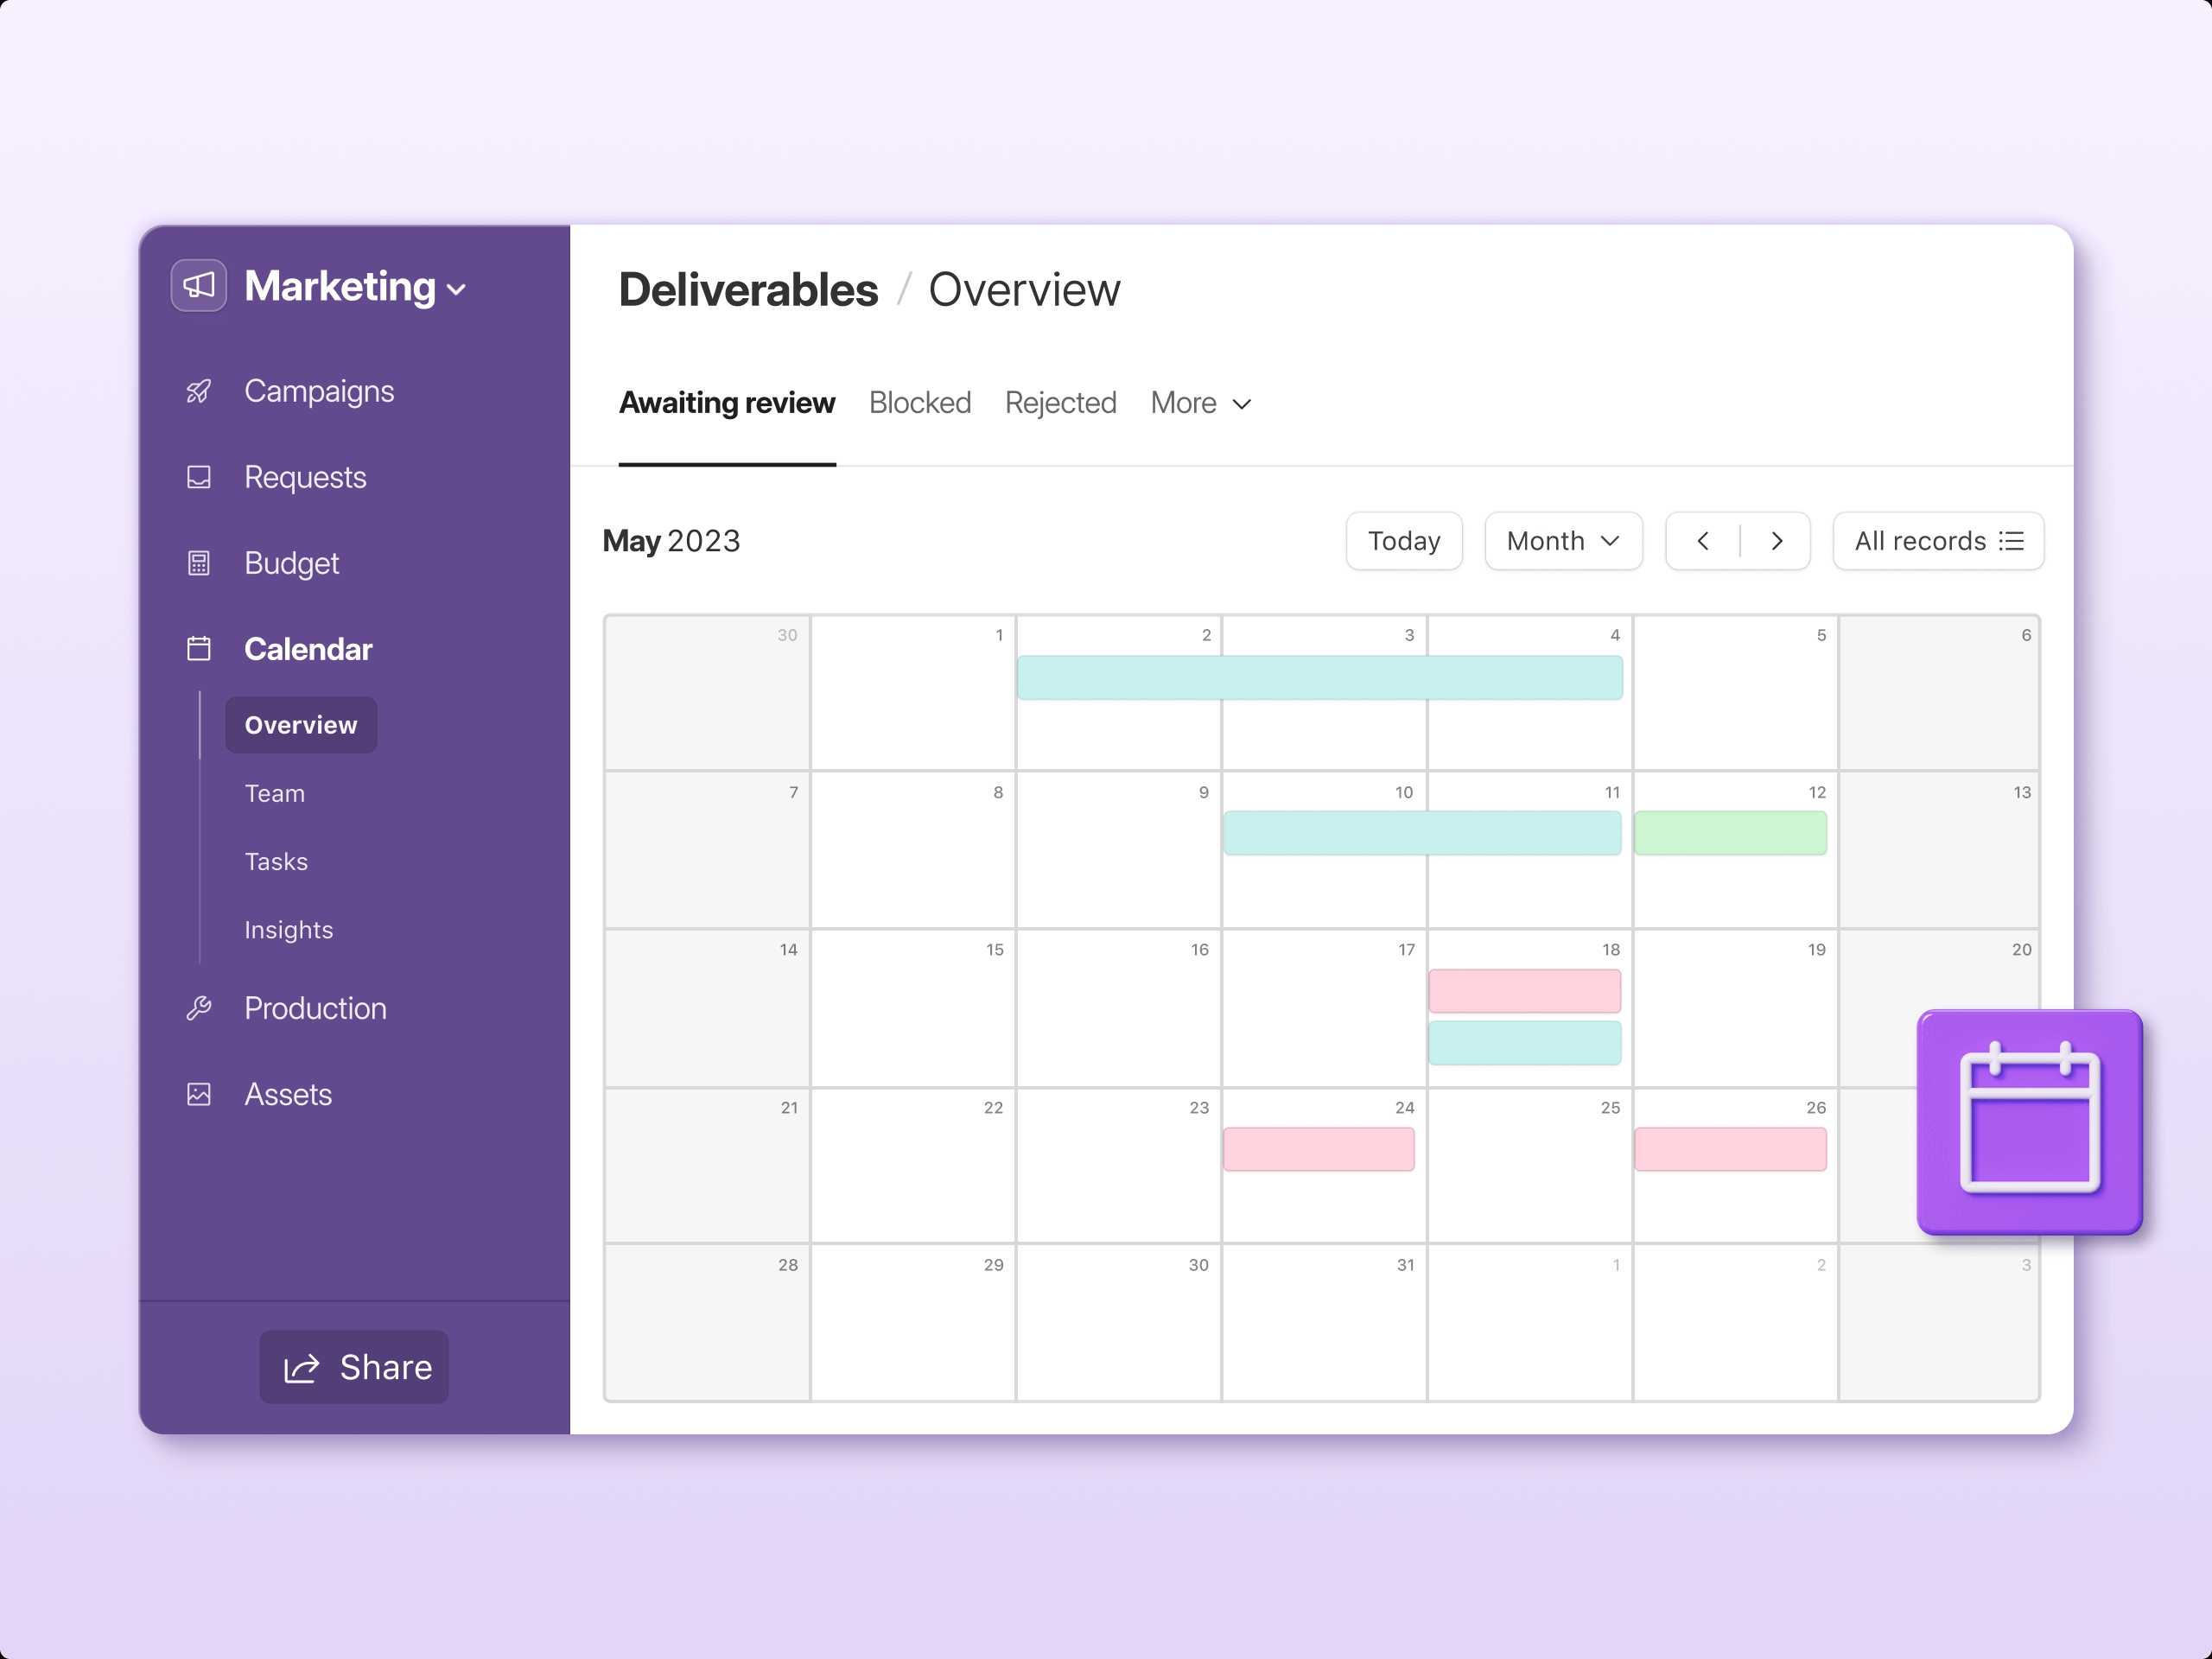 Airtable marketing calendar app shows a calendar view of multiple deadlines and projects